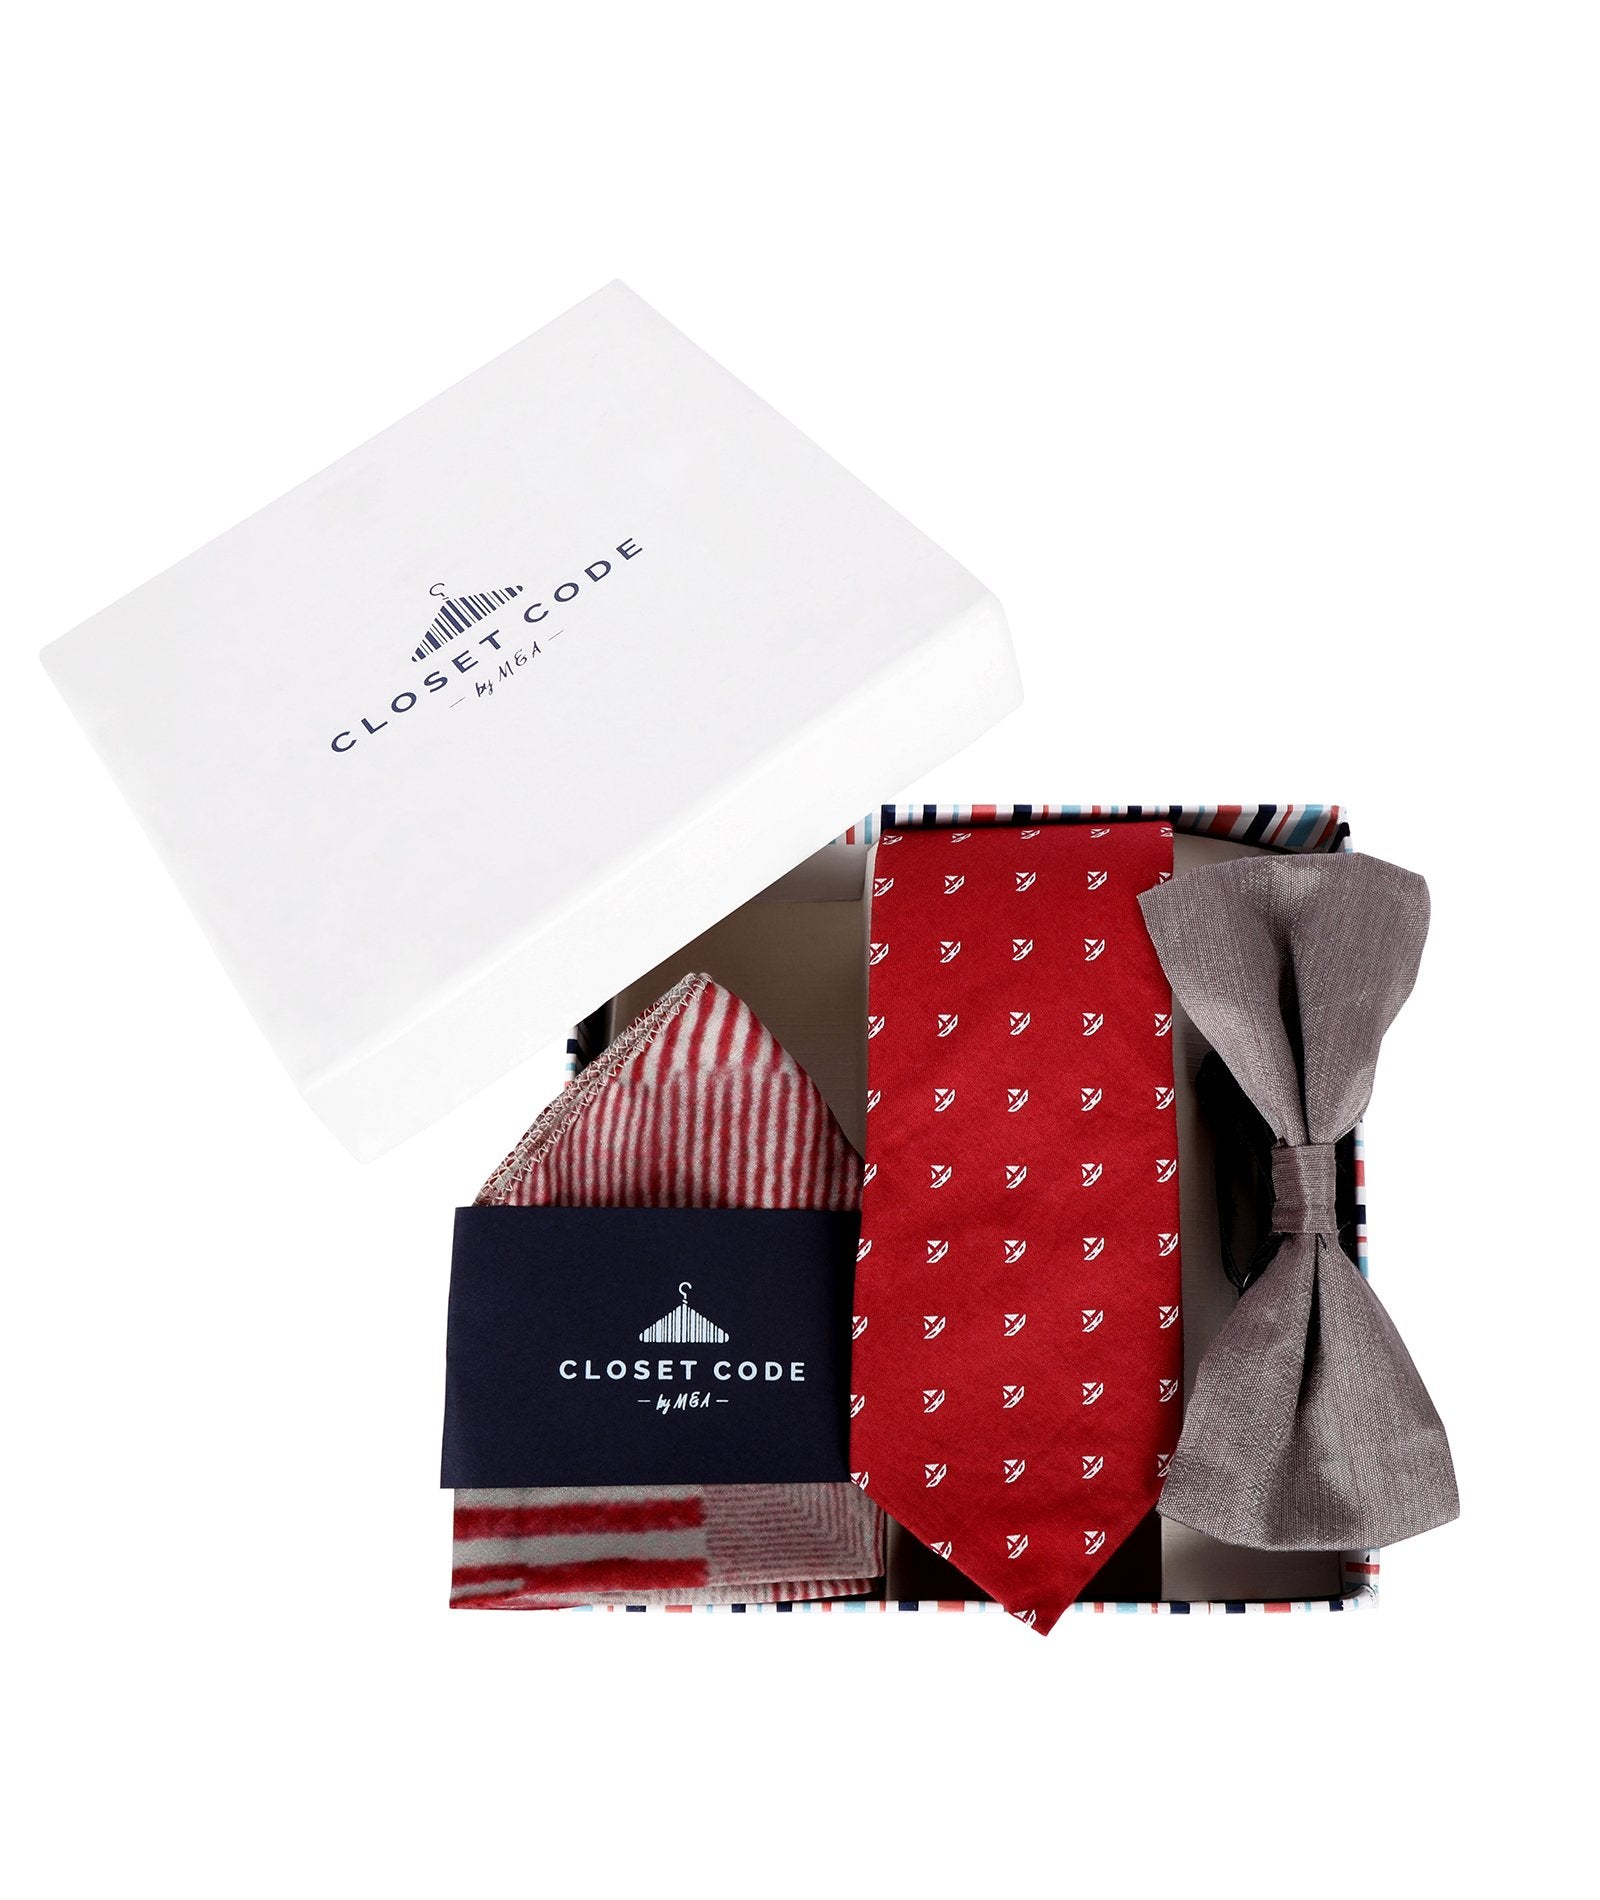 The Red-Grey Sail Away Gift Set